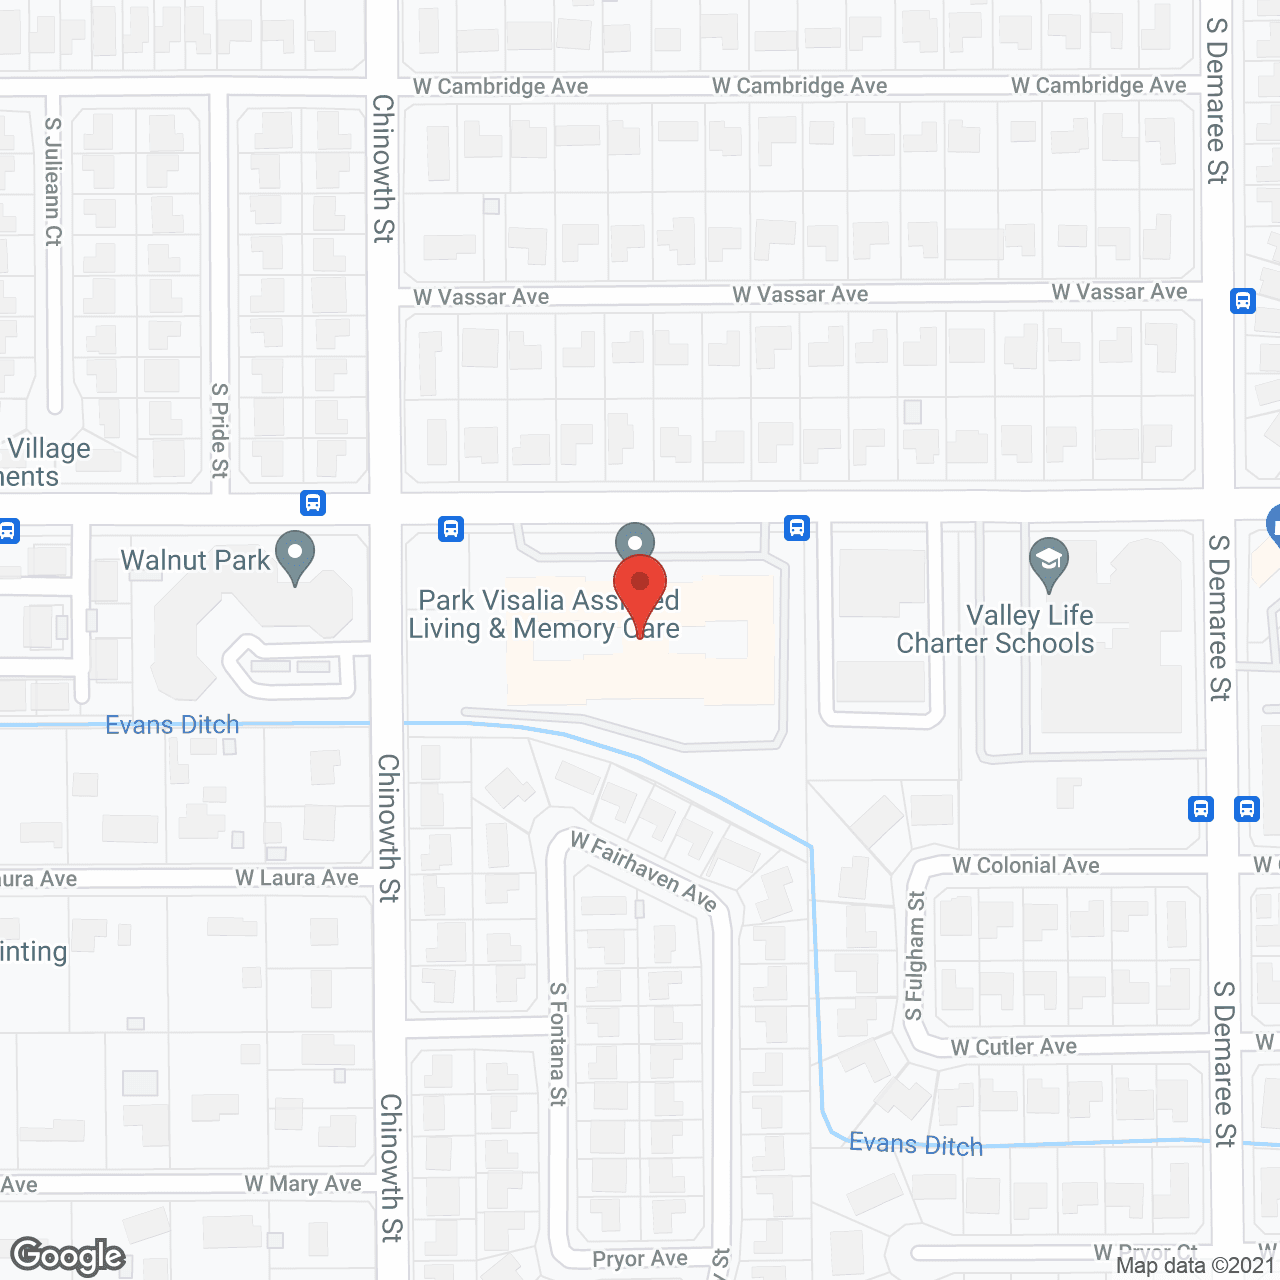 Park Visalia Assisted Living and Memory Care in google map